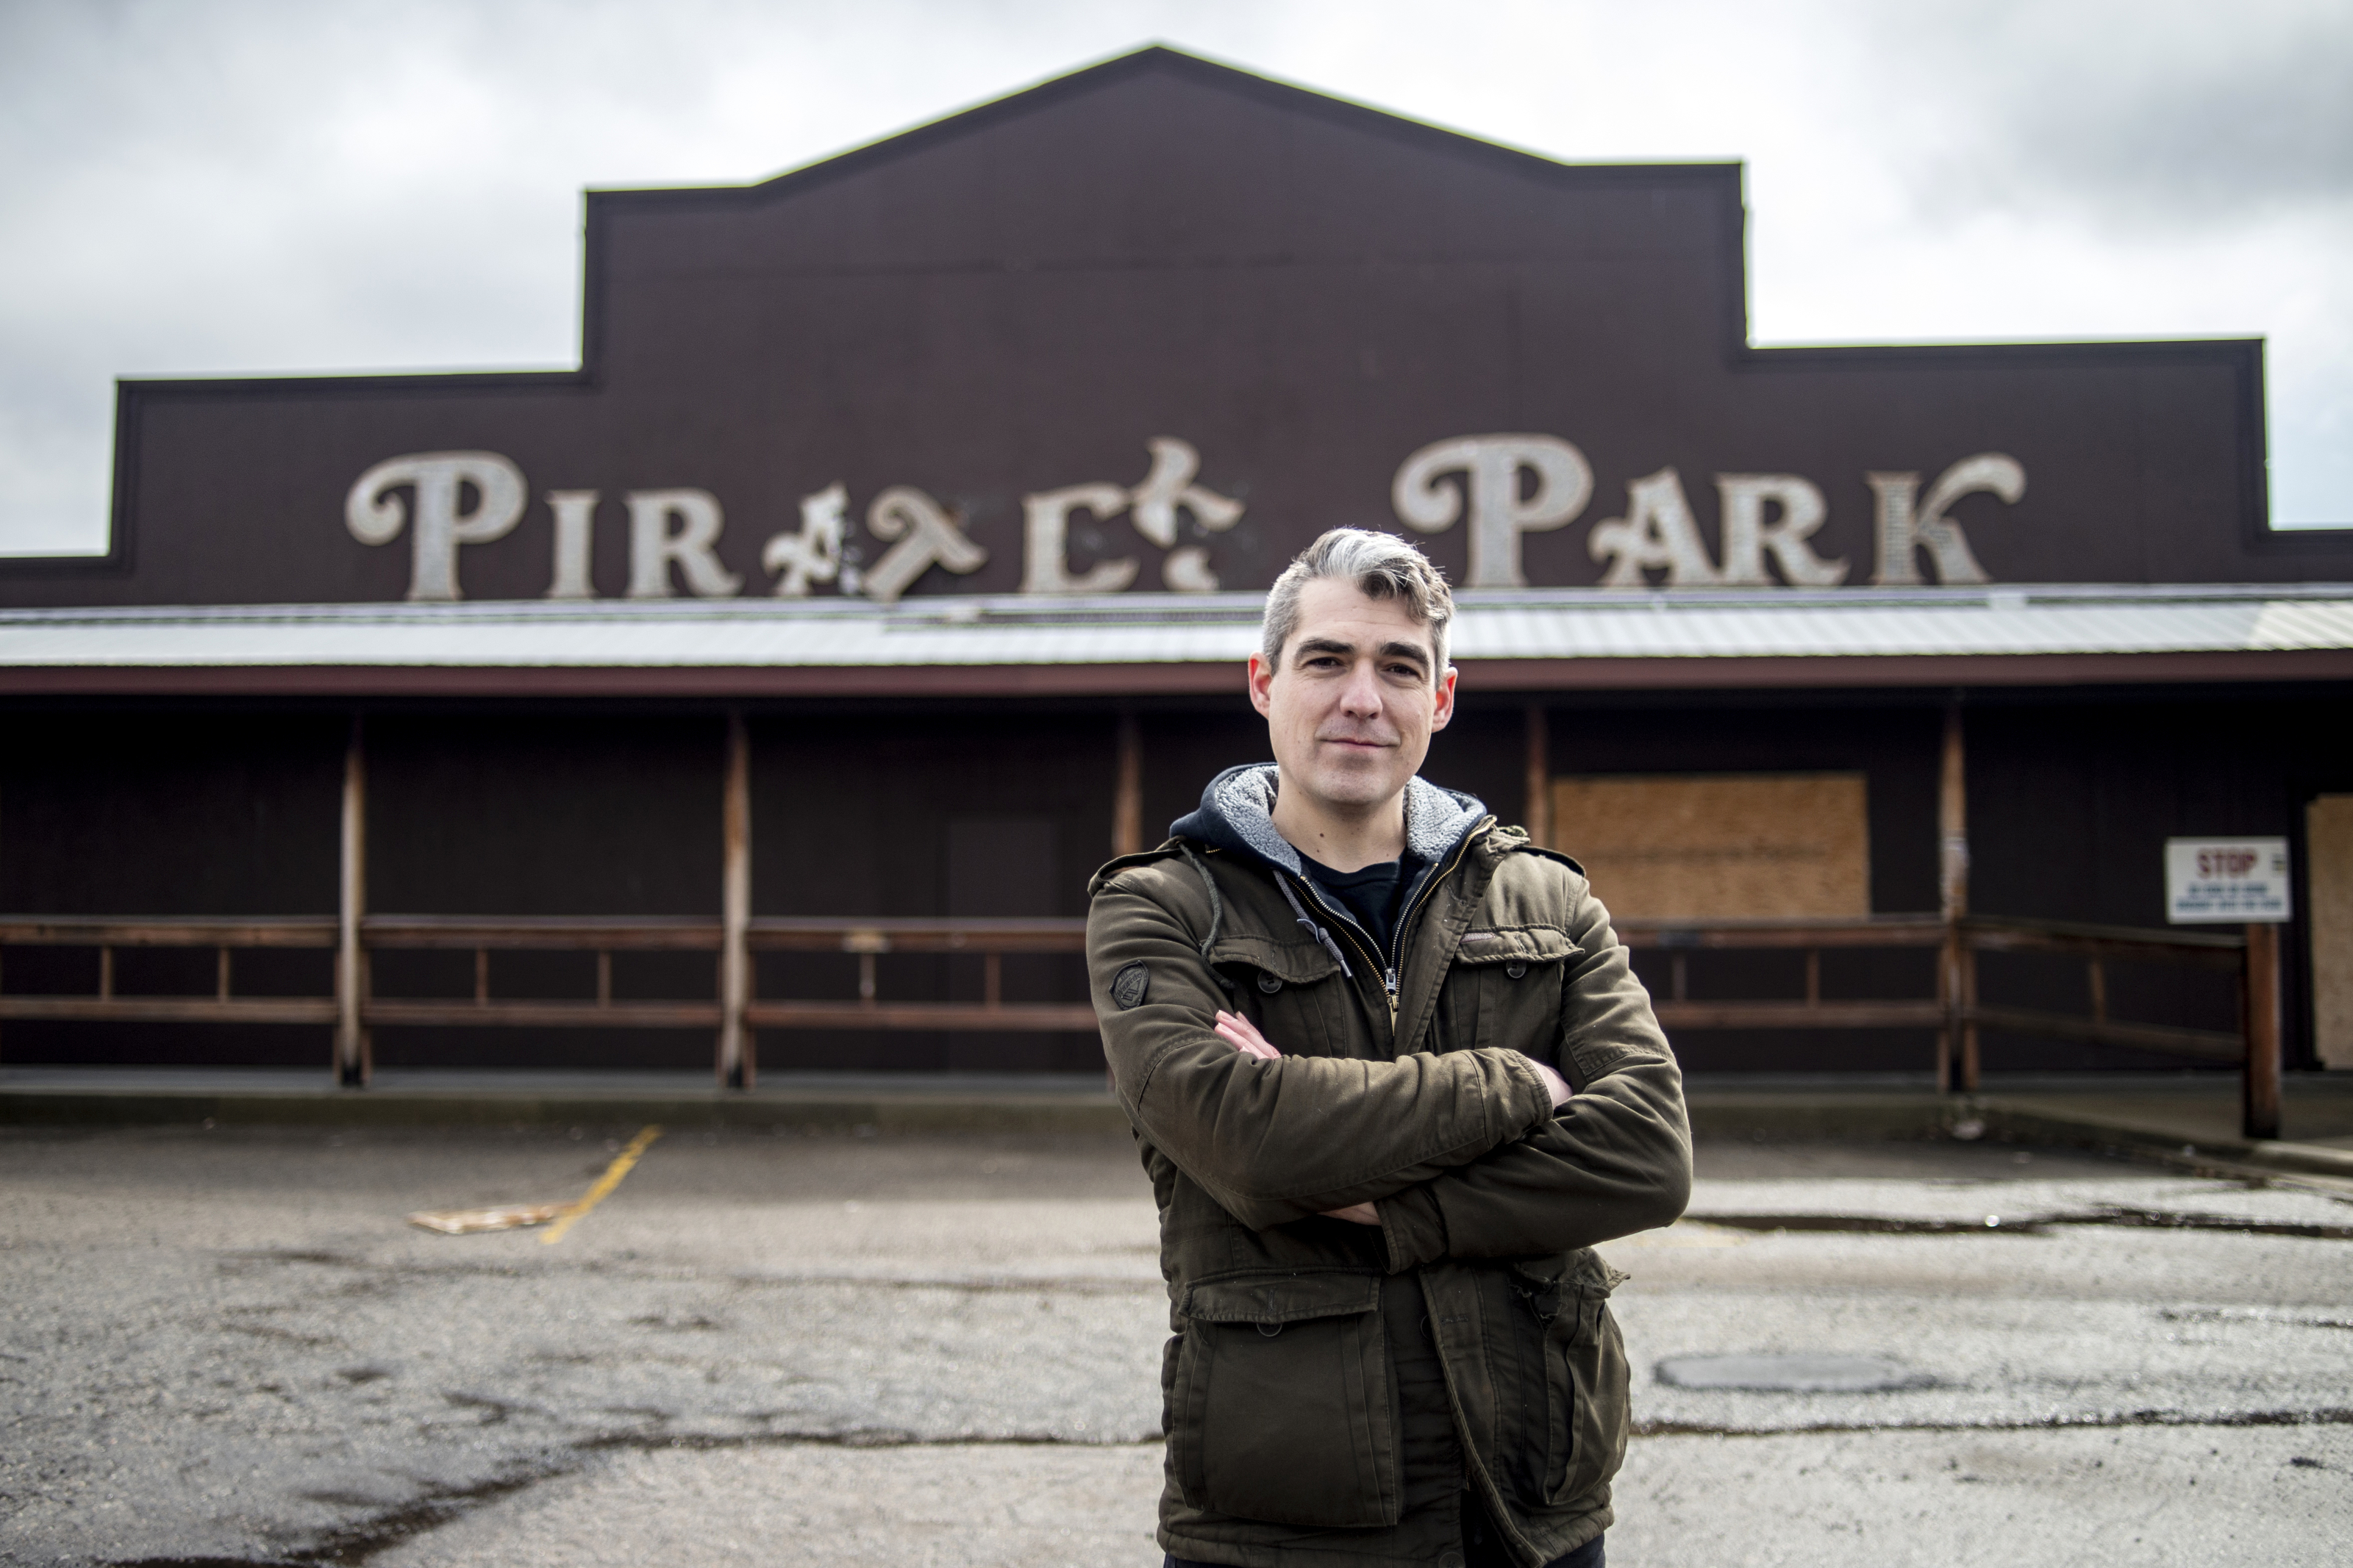 Pirate's Park could reopen with Flint area's support, entrepreneur says 